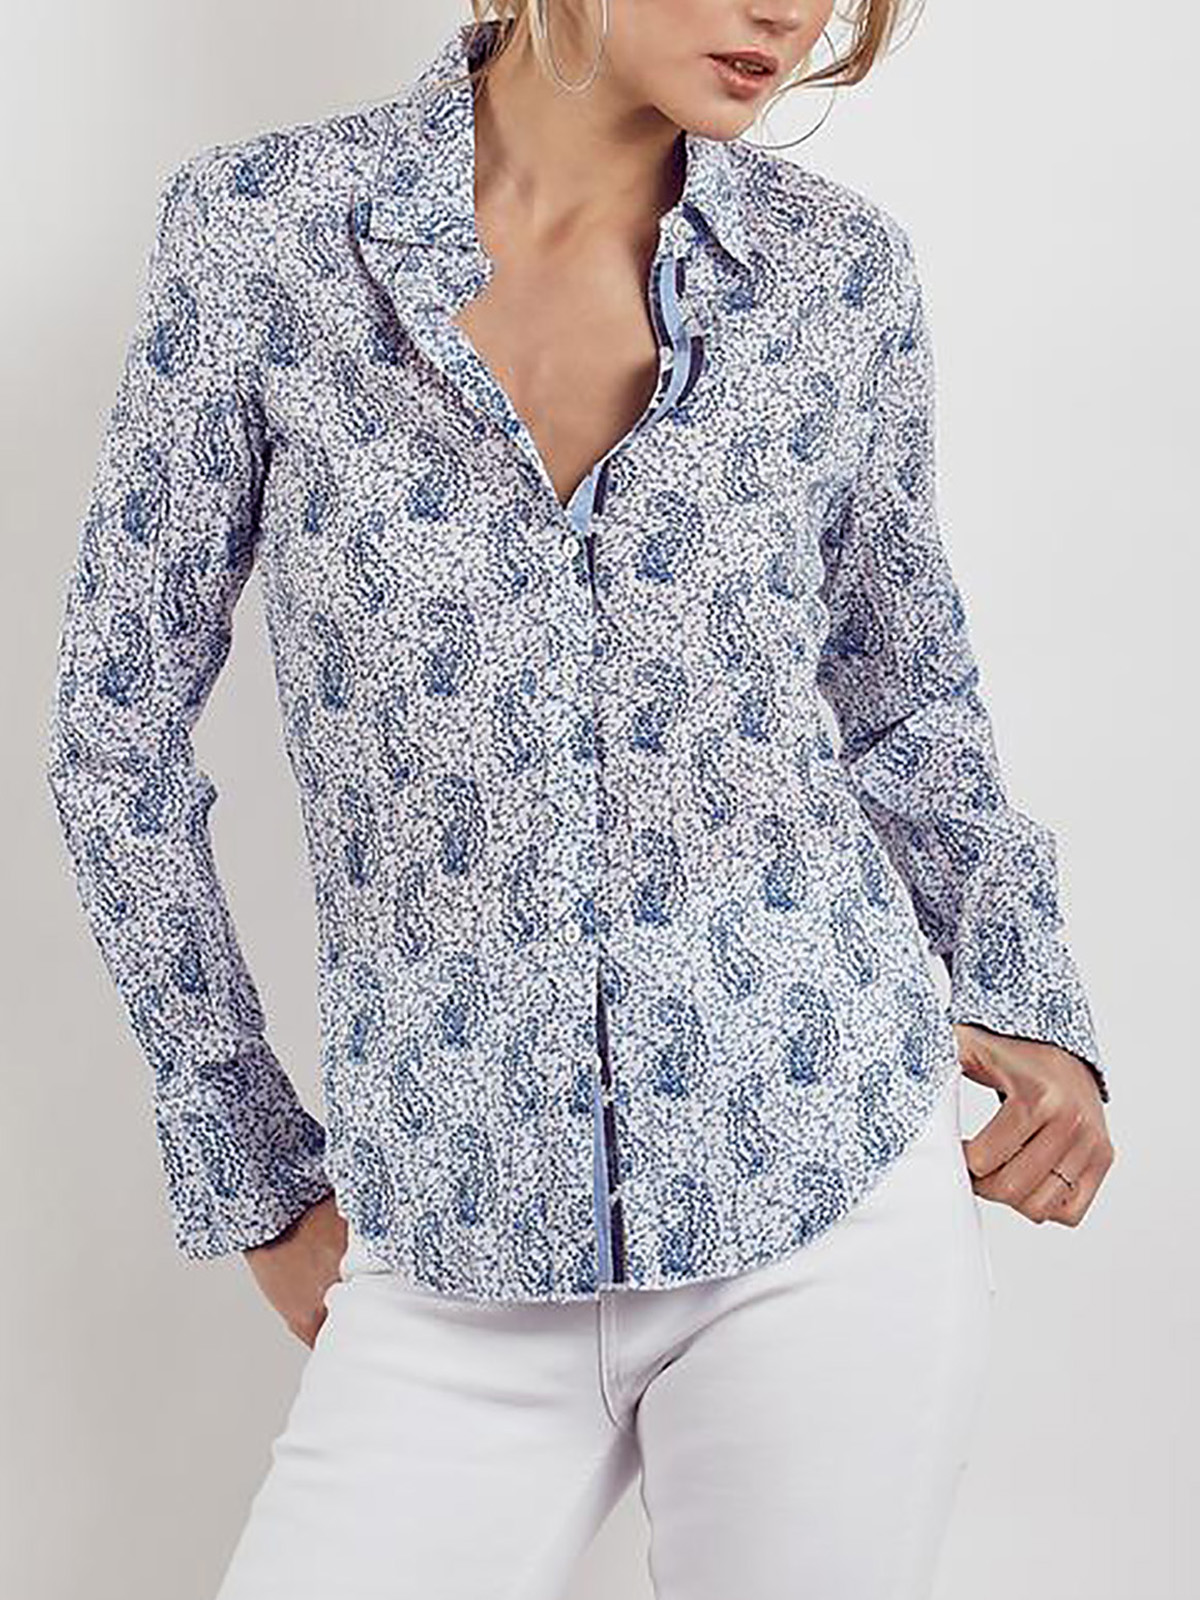 CINO - - CINO BLUE Floral Pure Cotton Crinkle Shirt - Size 8 to 18 (XXS ...